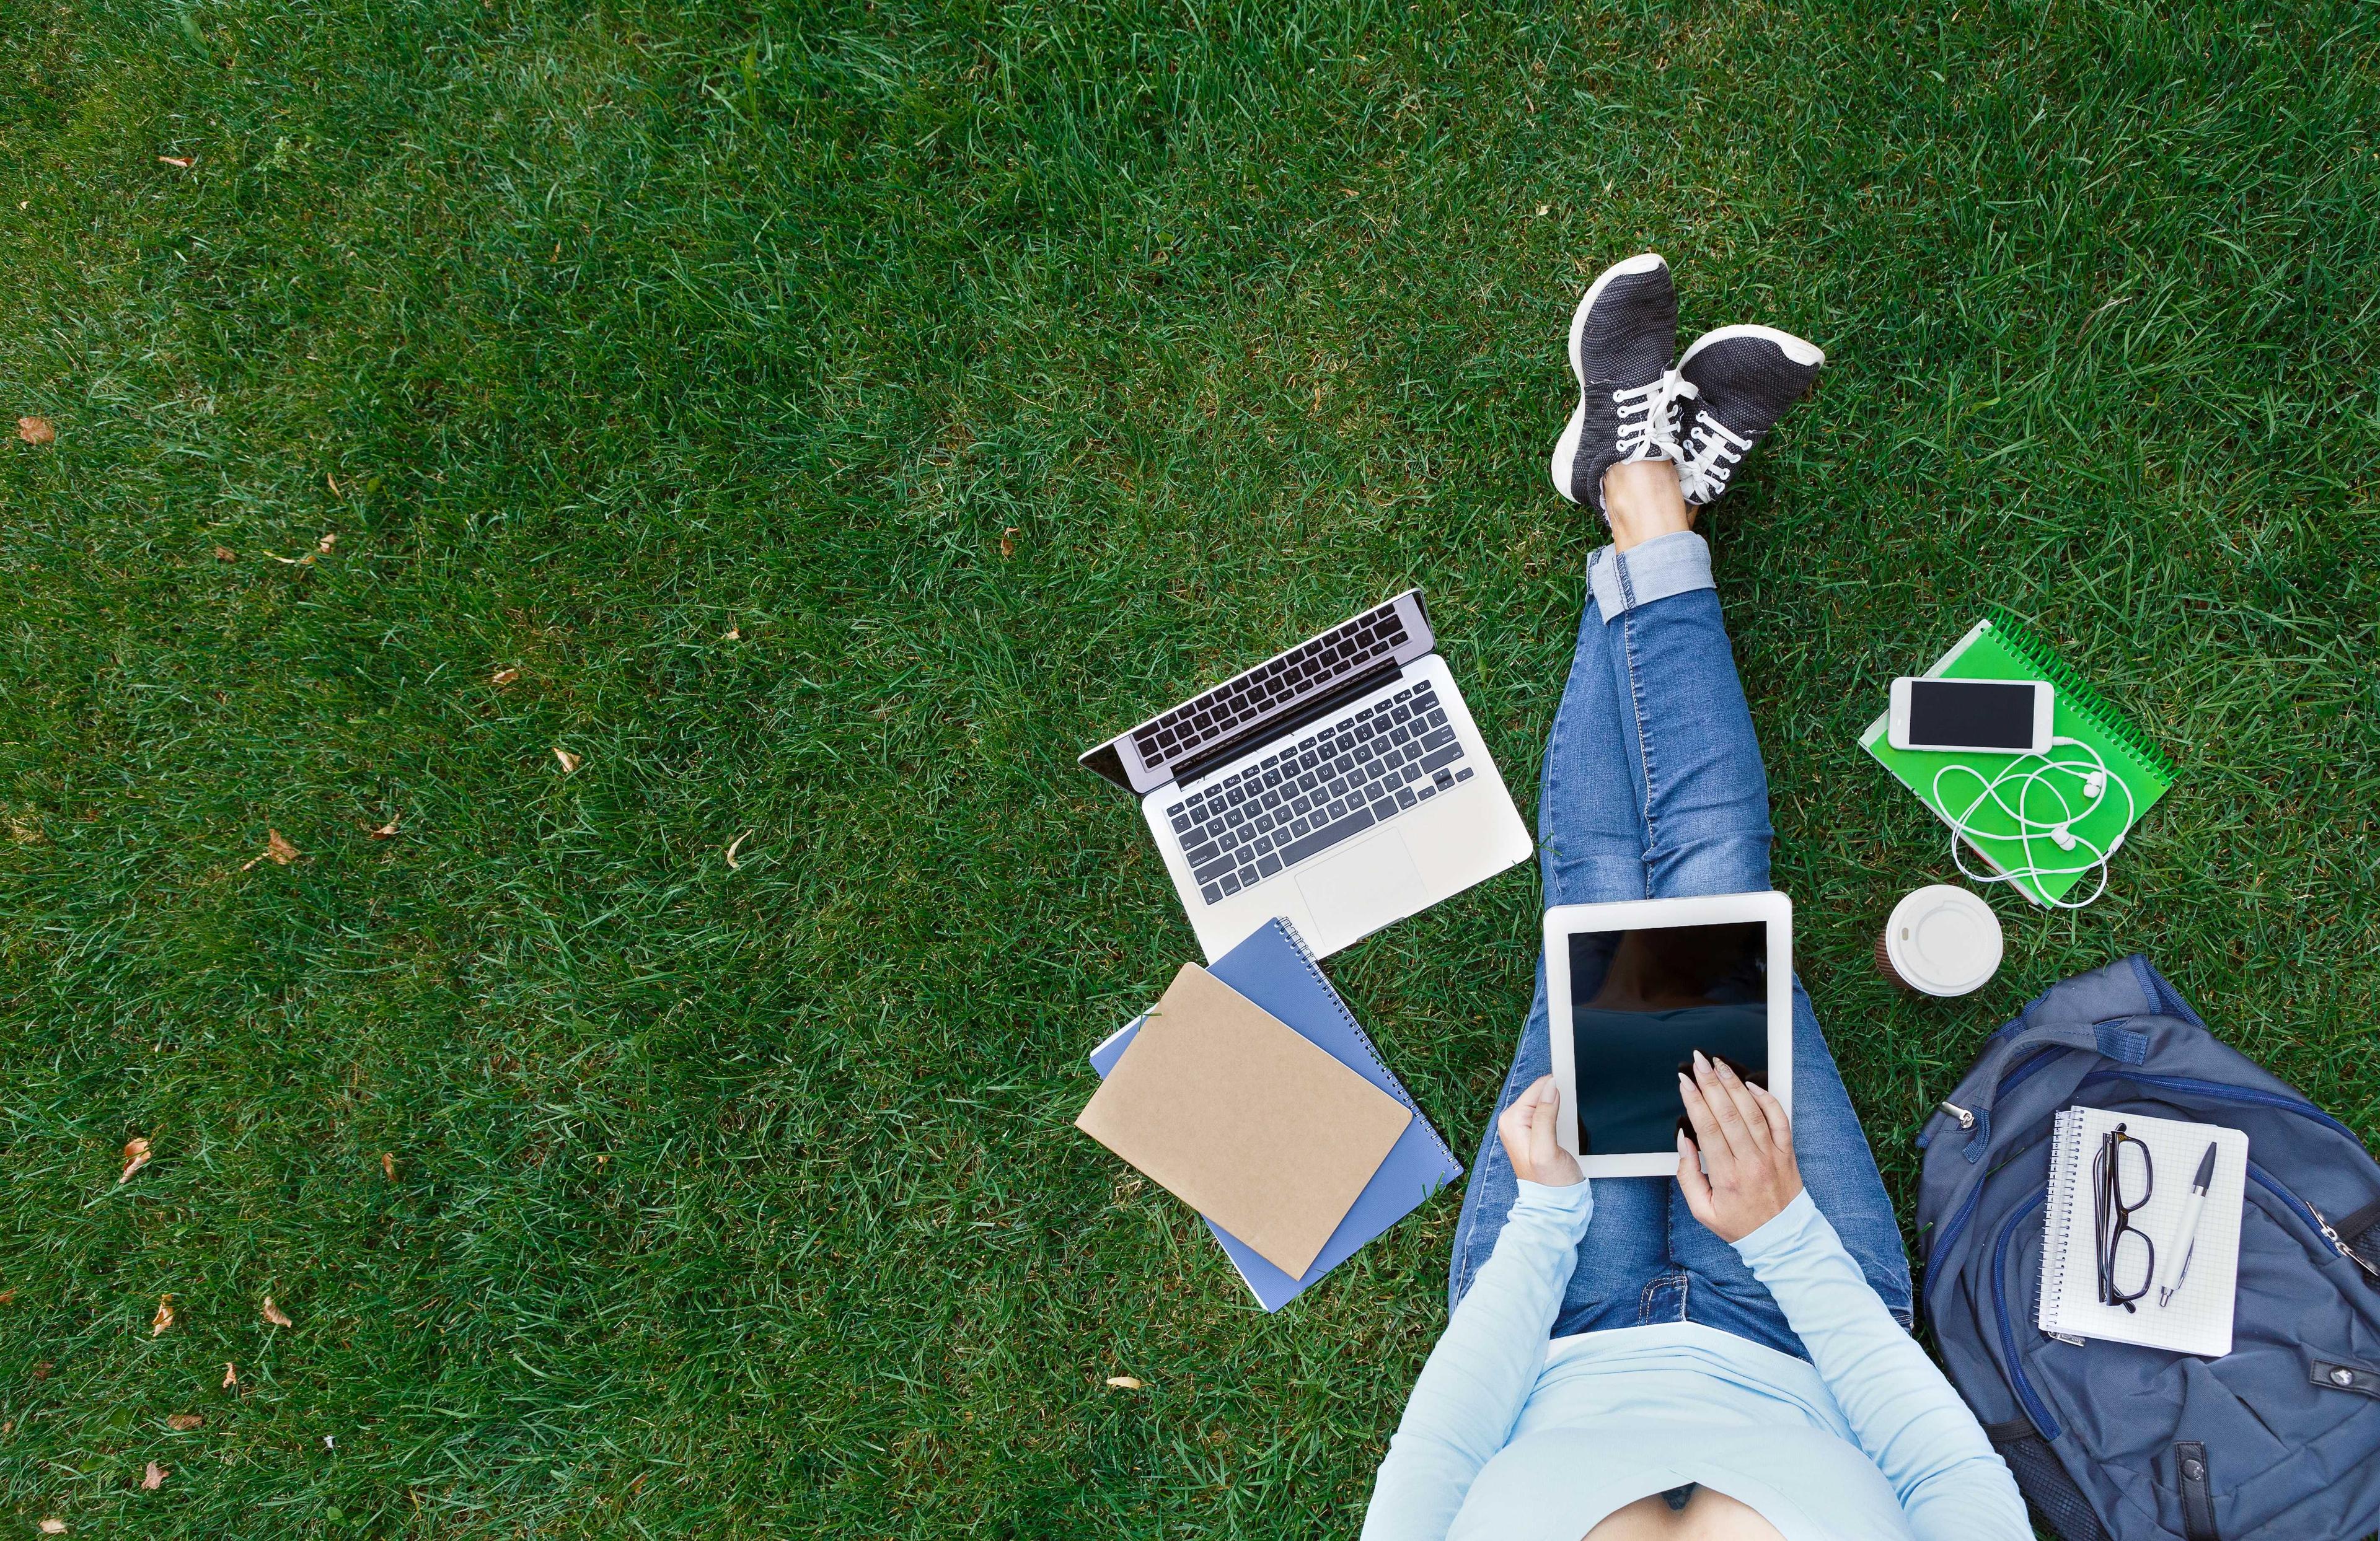 A woman sitting on the grass and holding a tablet. She is surrounded by different objects such as a laptop, a mobilephone, notebooks and a bag.